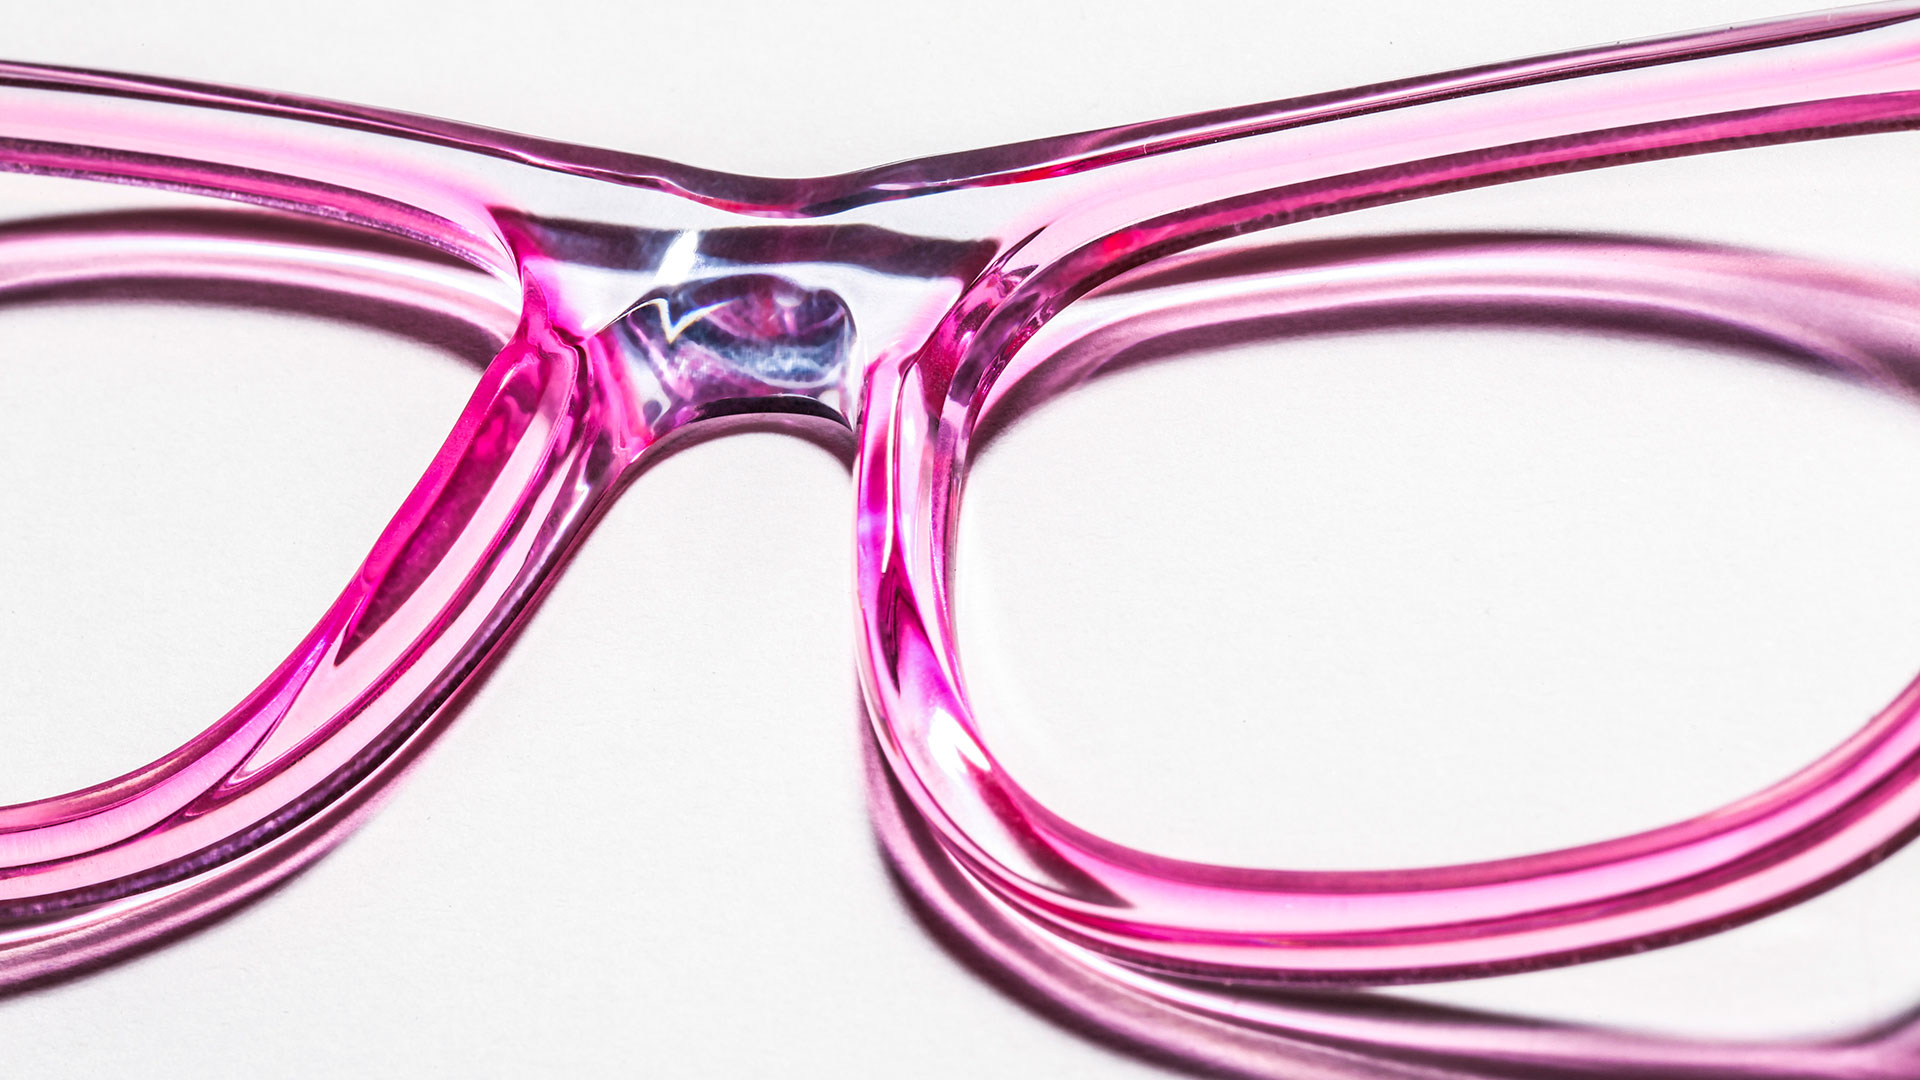 Closeup of glasses frame produced by accessories hard goods product photographer Kate Benson.